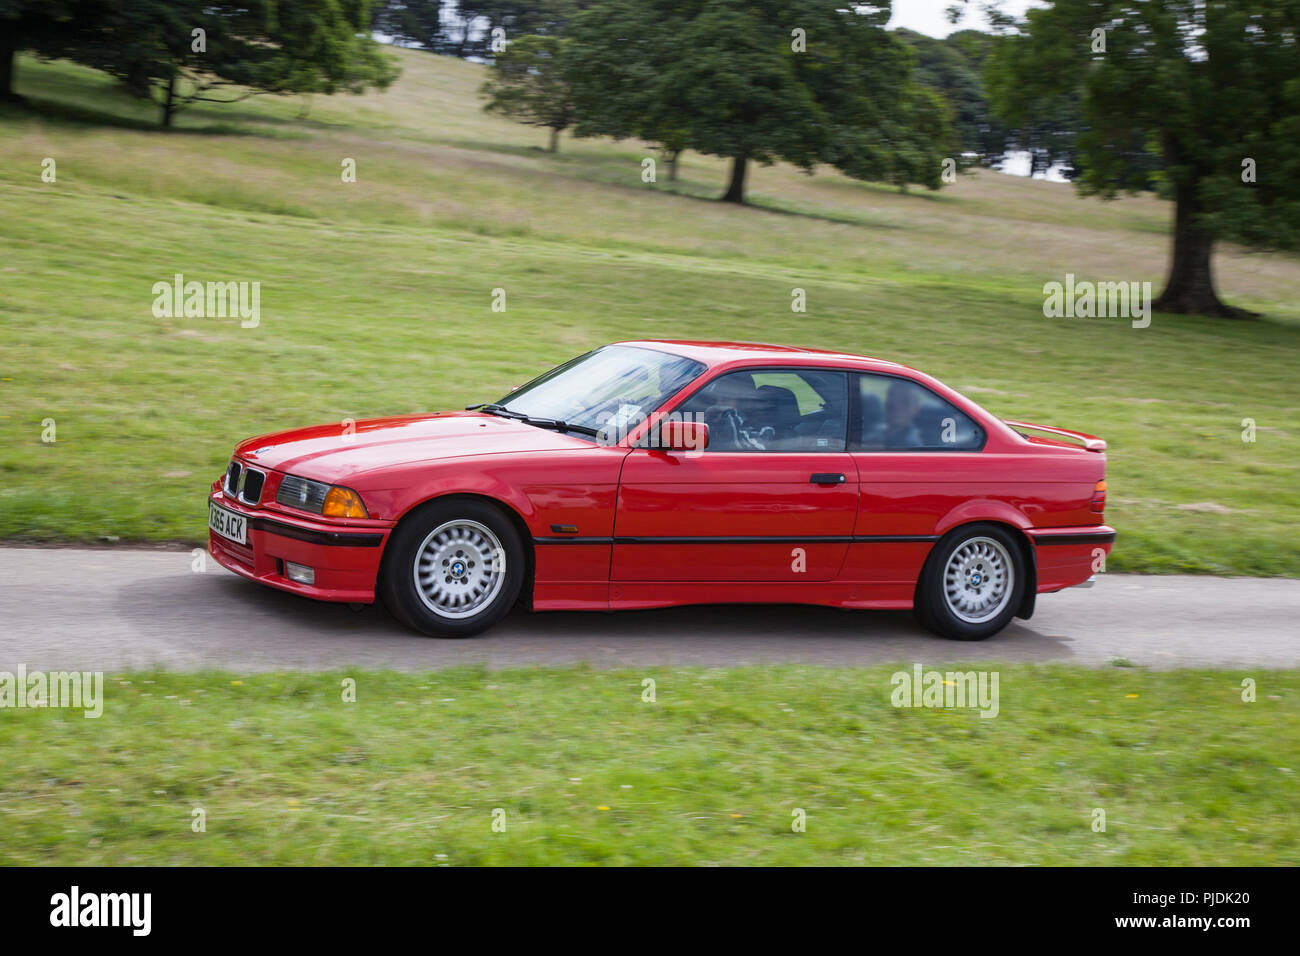 Bmw 318 High Resolution Stock Photography and Images - Alamy